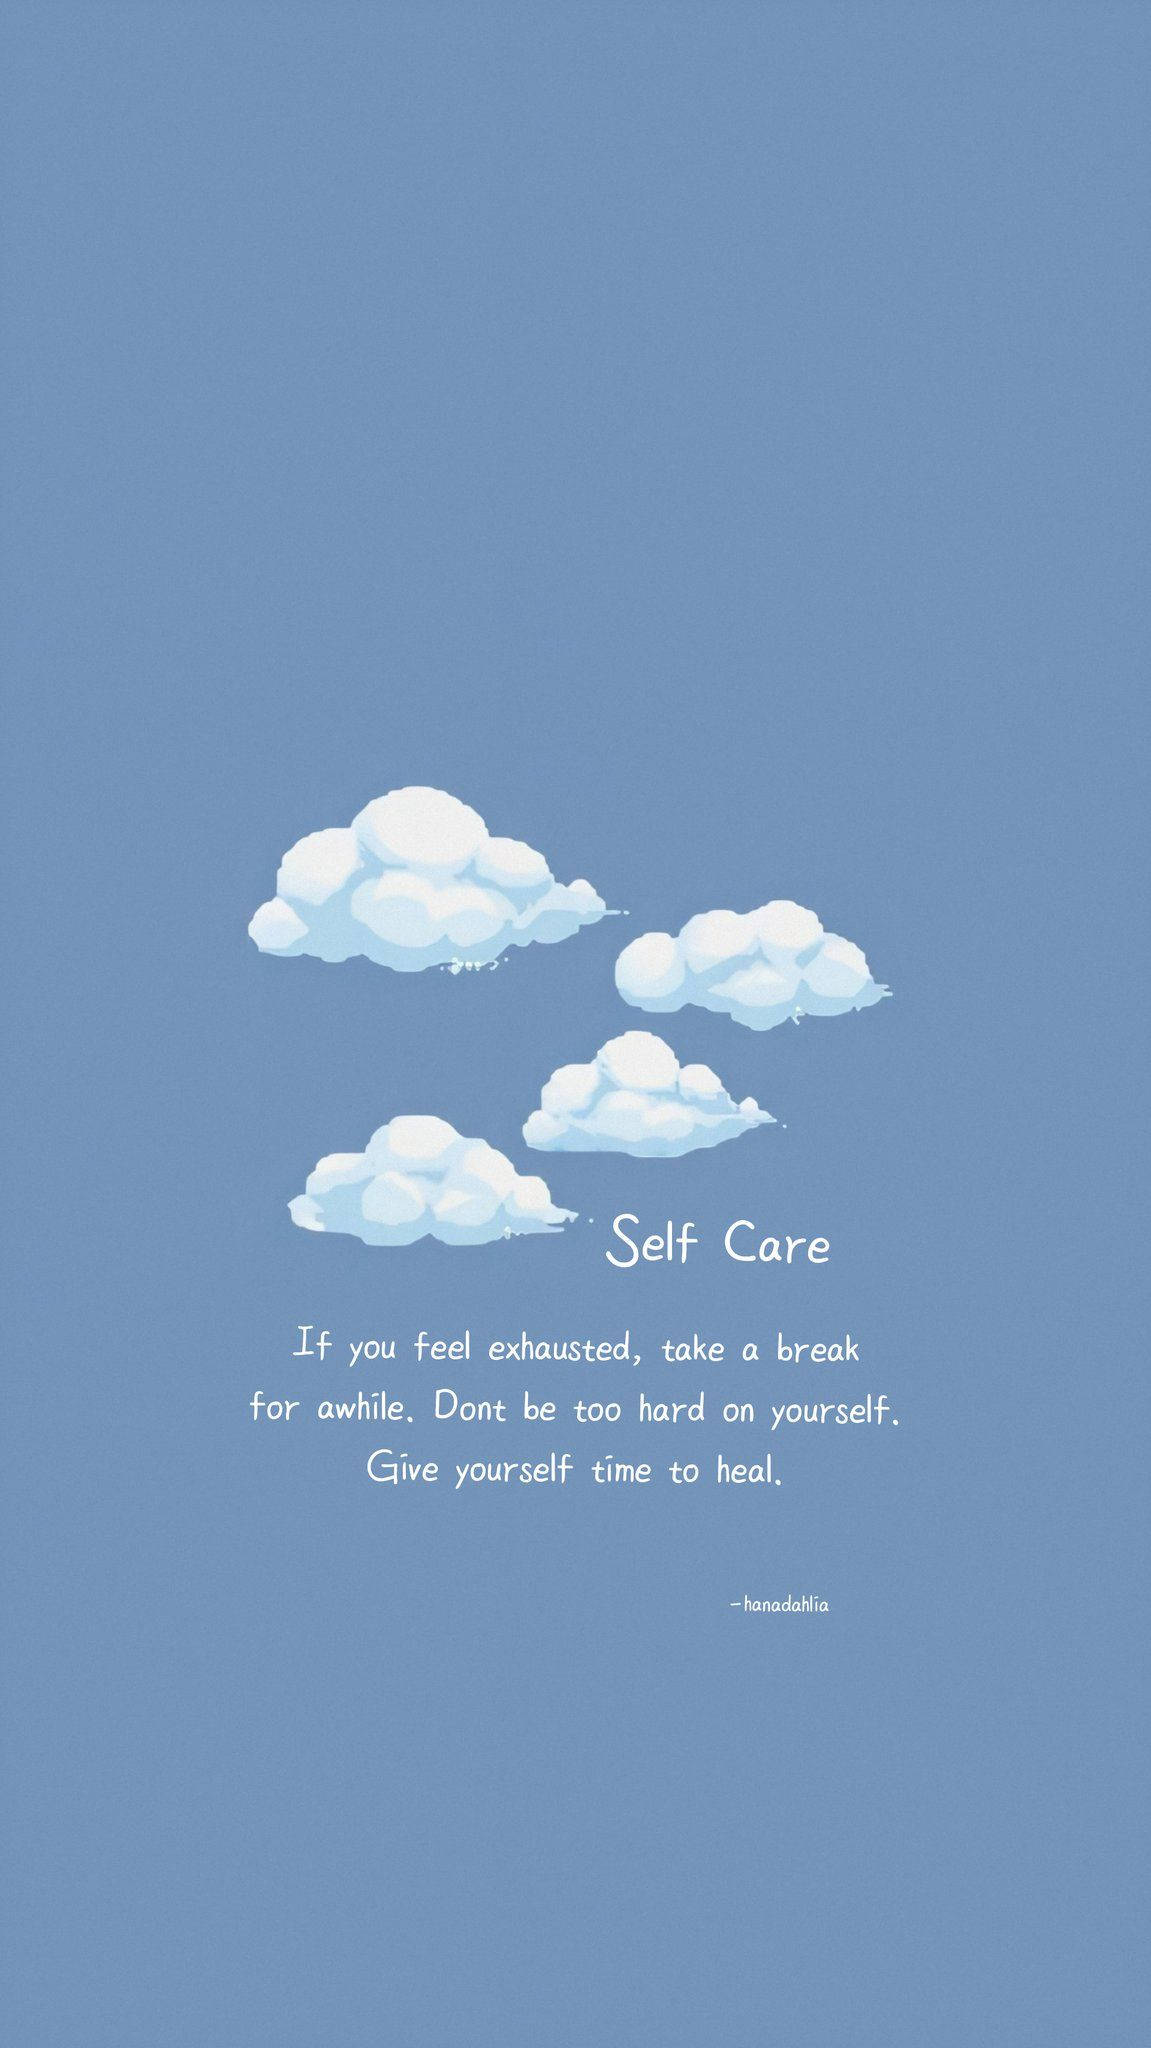 Self care quote on a blue background with clouds - Wednesday